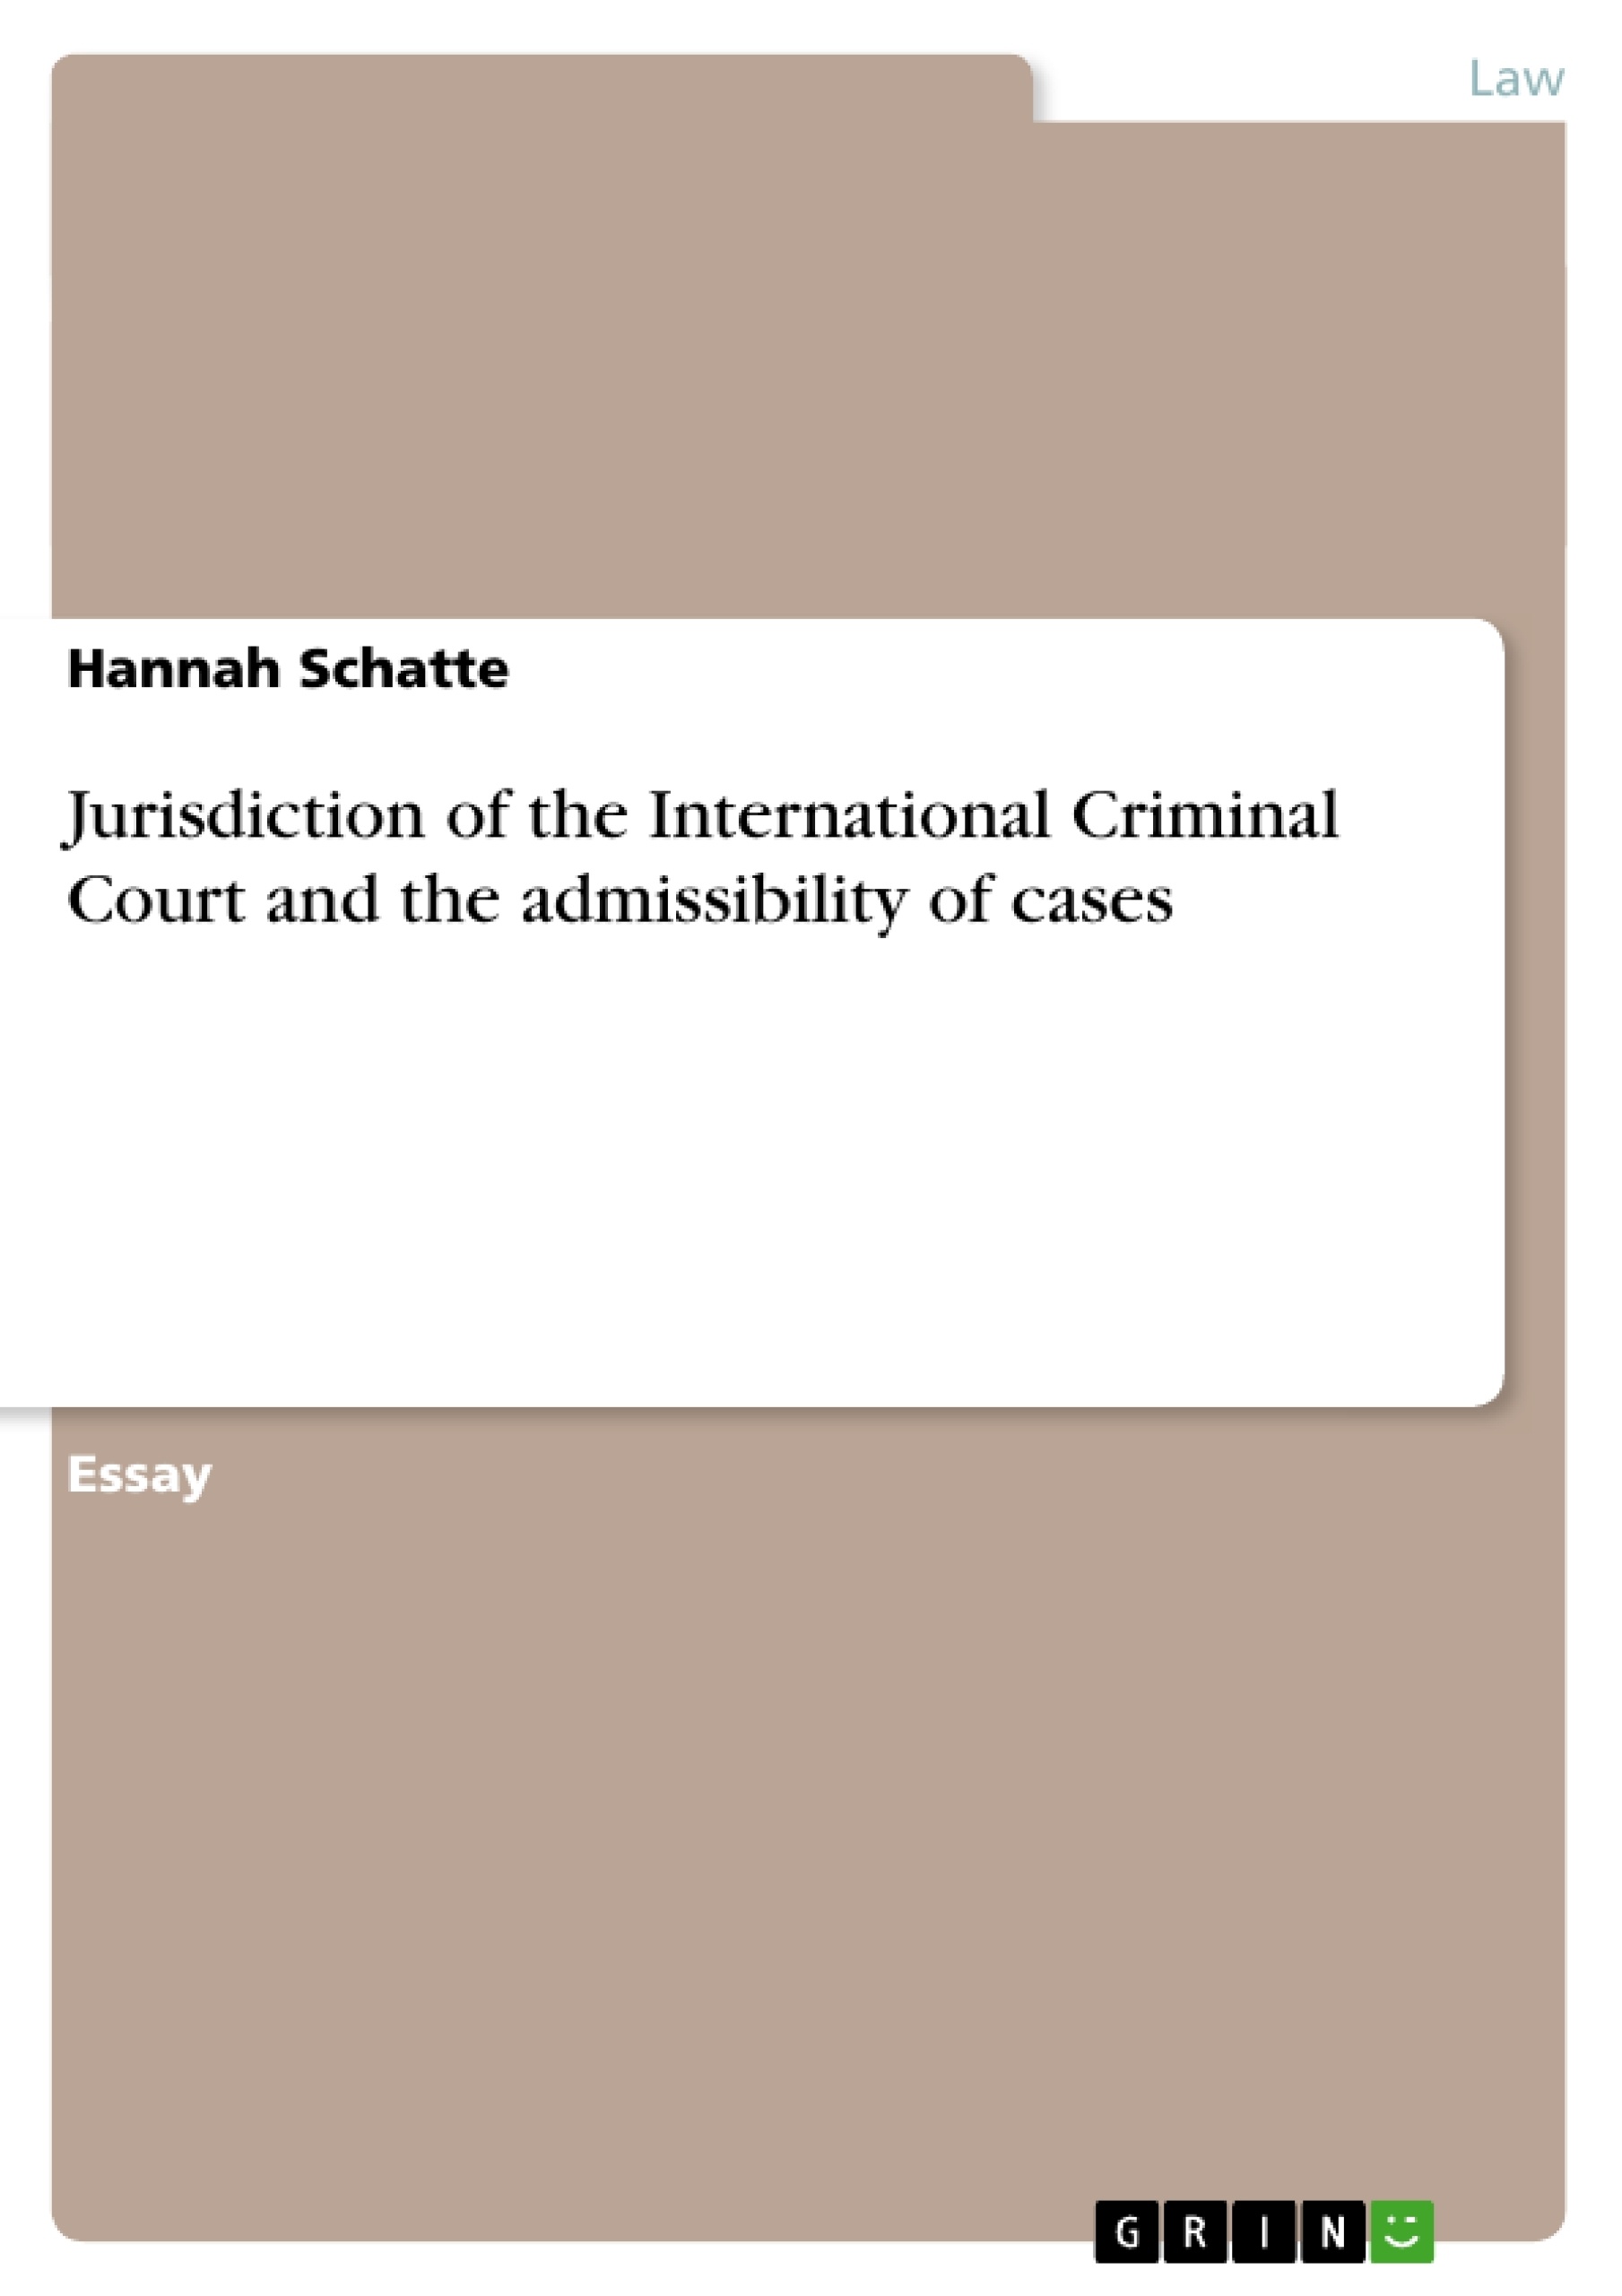 Title: Jurisdiction of the International Criminal Court and the admissibility of cases